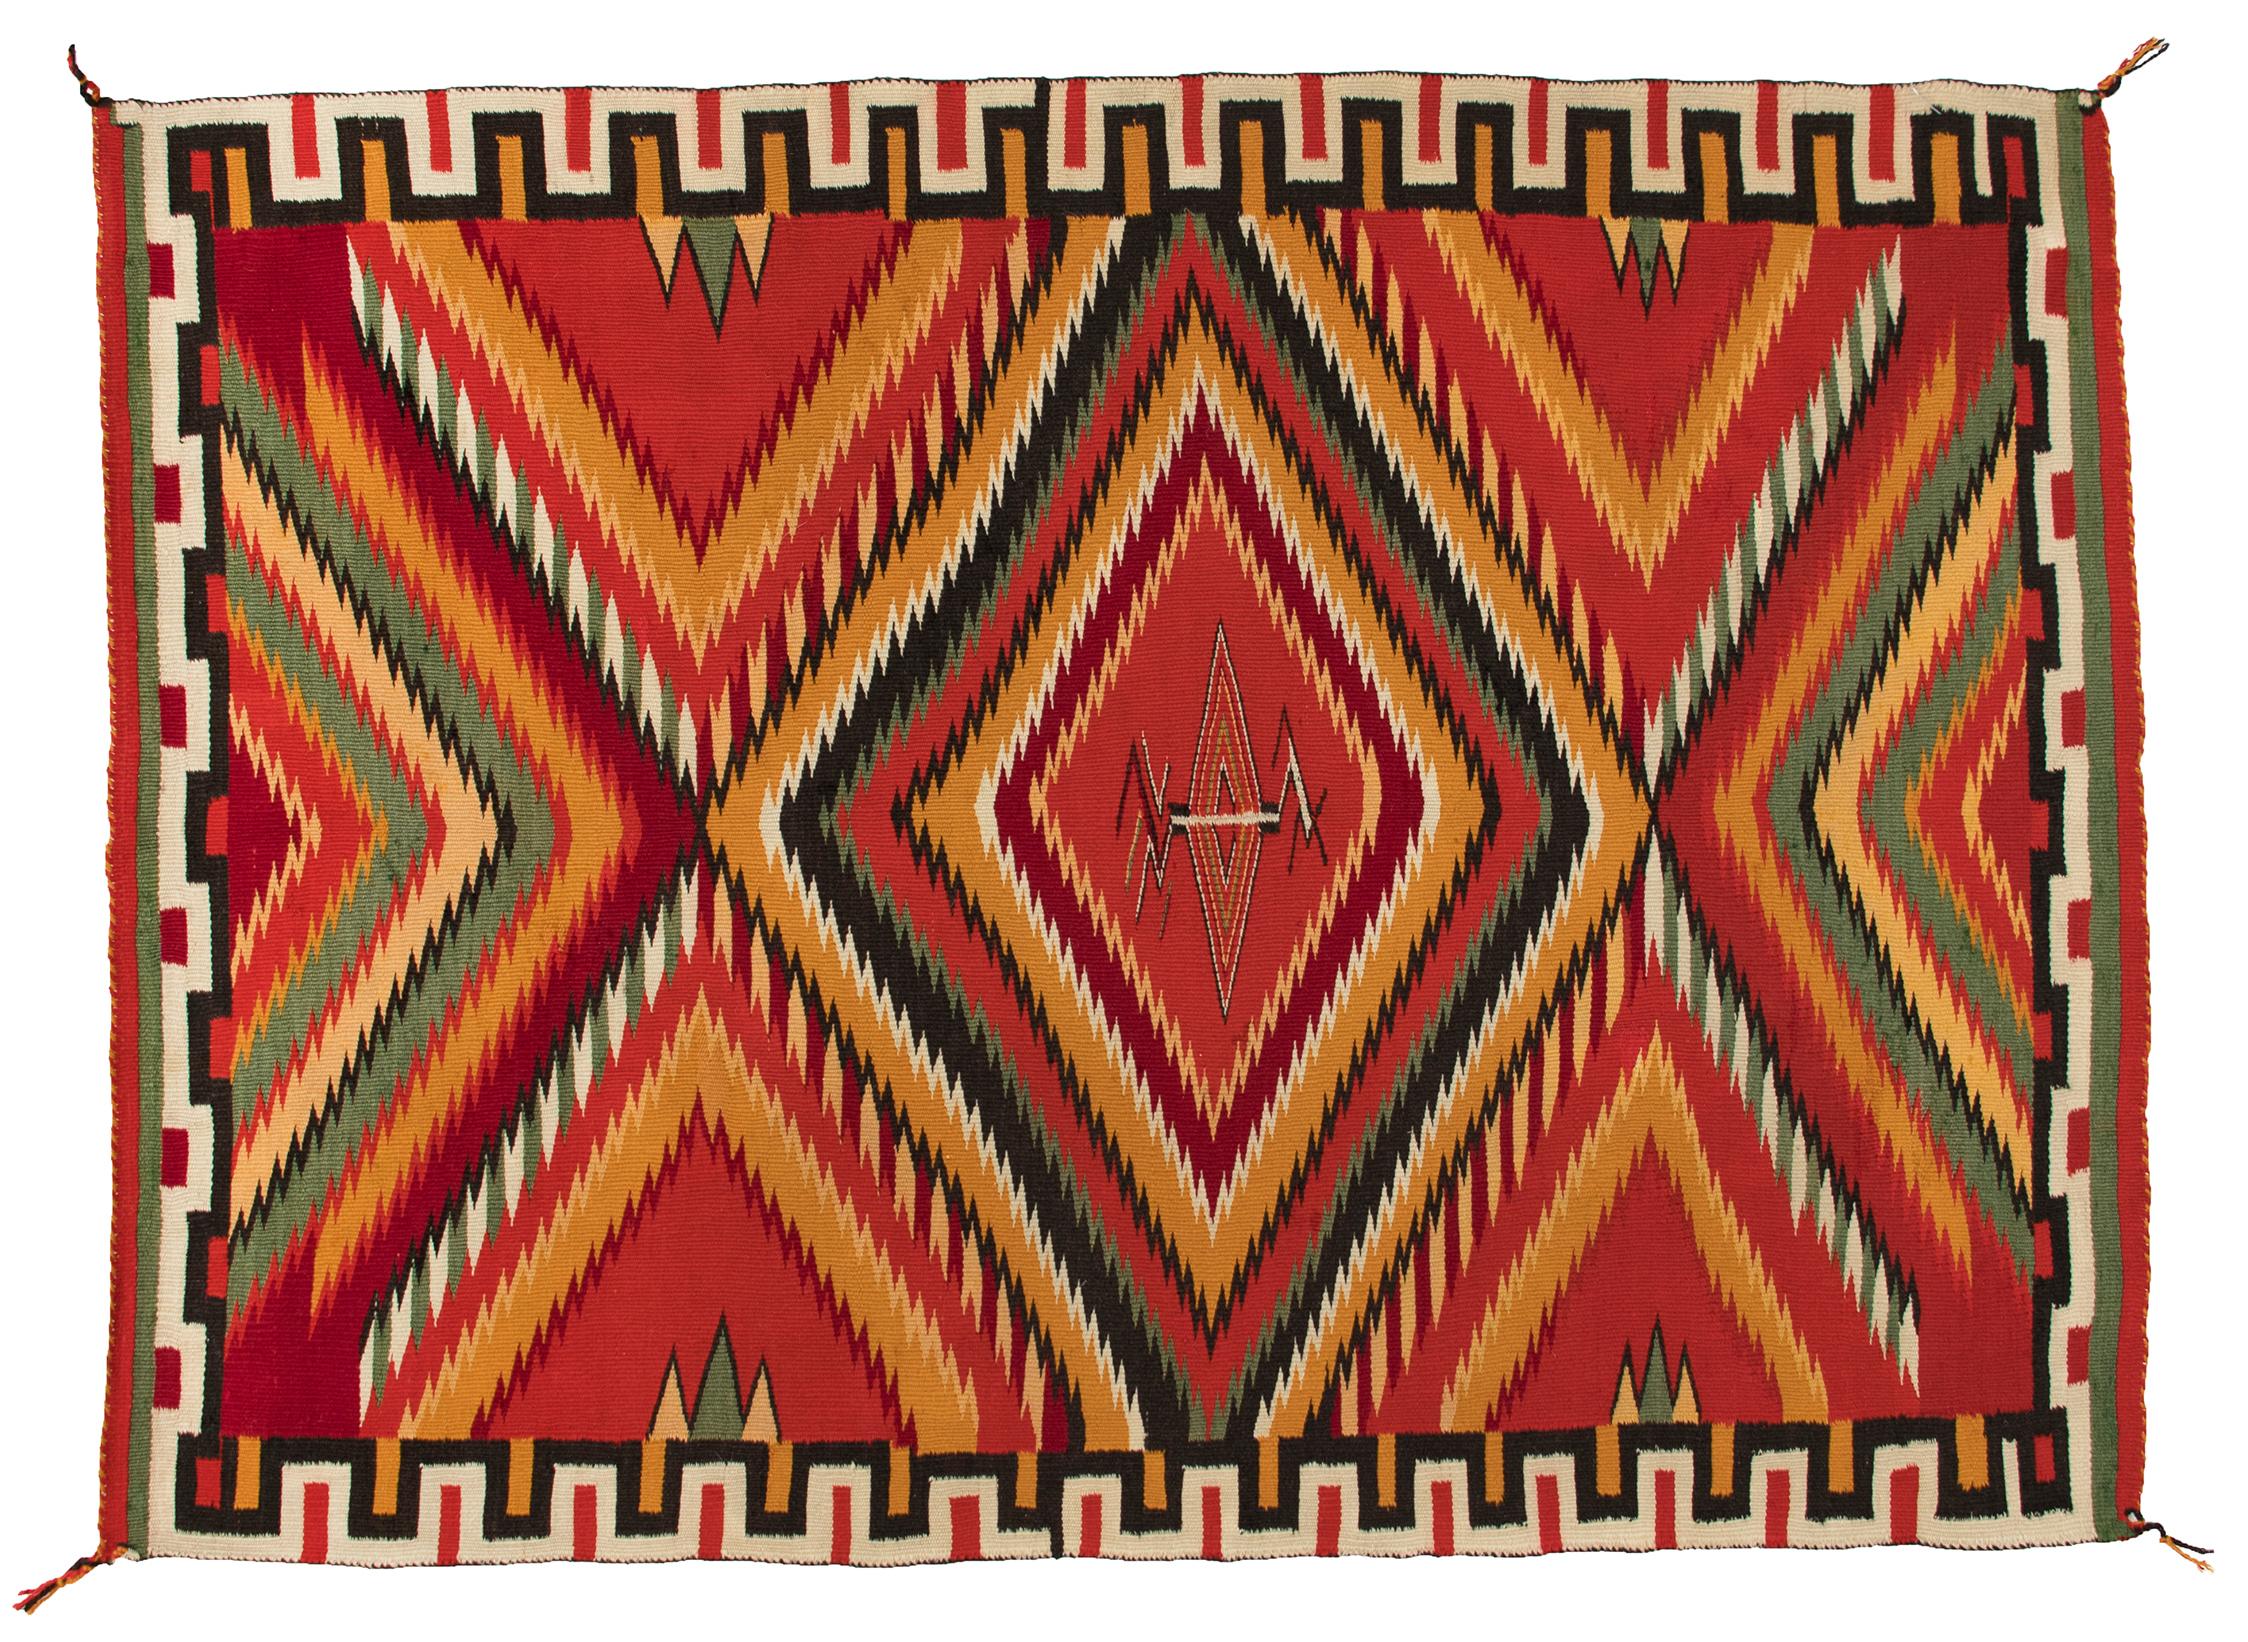 Vintage circa 1890 (19th century) Navajo textile woven of Germantown Yarns in an Eyedazzler diamond pattern of vibrant colors including red, green, yellow/gold, black and white. Germantown textiles like this were woven by Native American Navajo